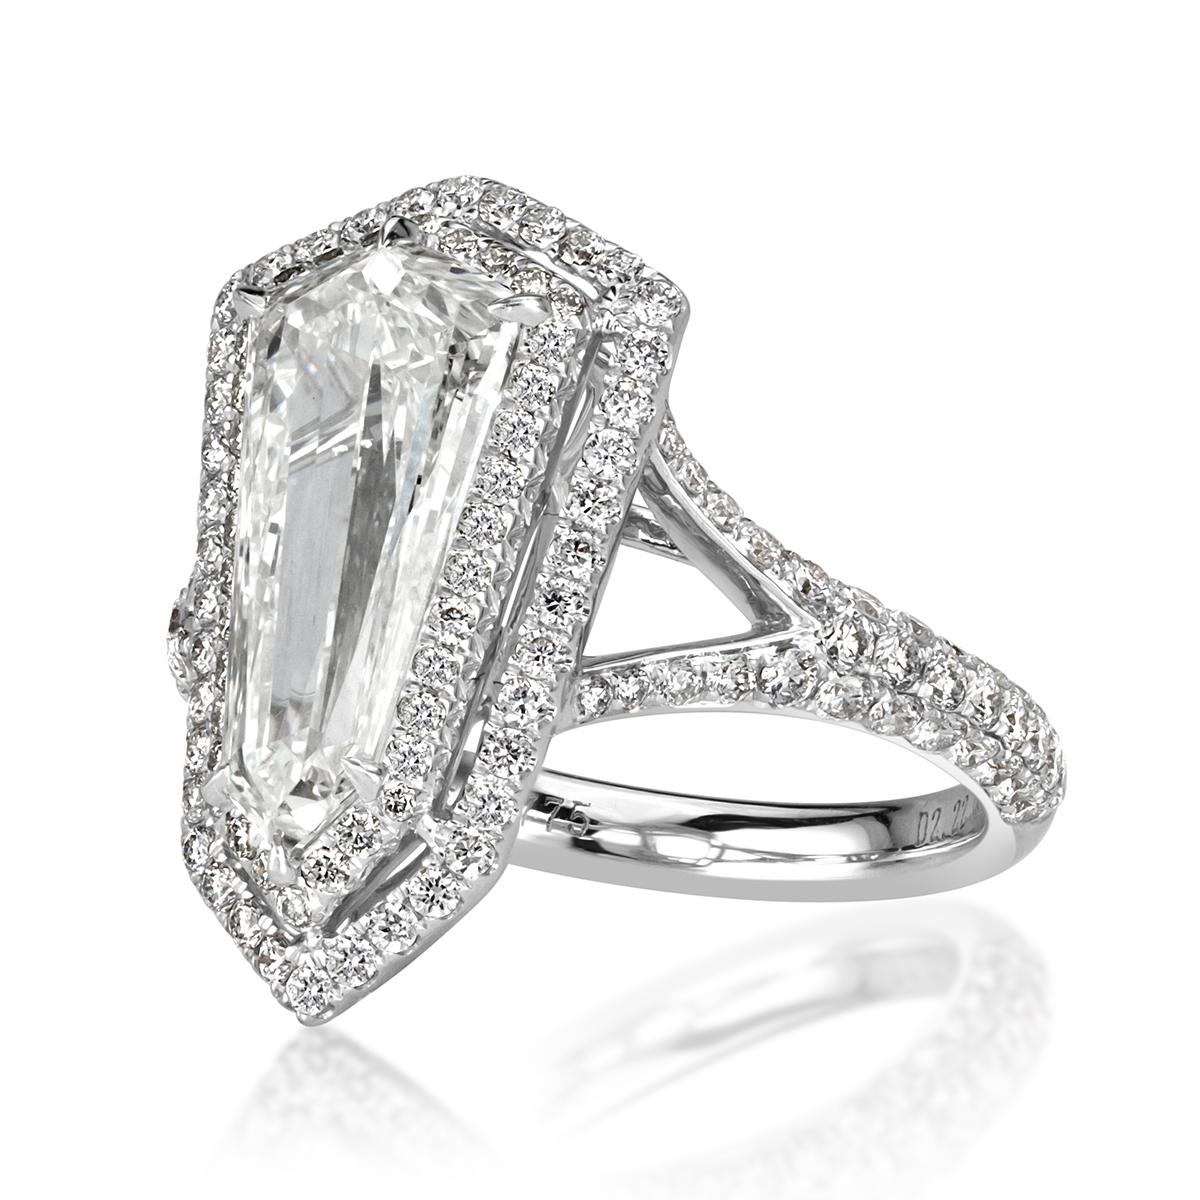 This unique diamond ring showcases a one-of-a-kind 2.22ct shield cut center diamond, measuring at 13x6.5mm, complimented by a gleaming double halo of round brilliant cut diamonds. For added sparkle, the dainty split shank is also studded with two